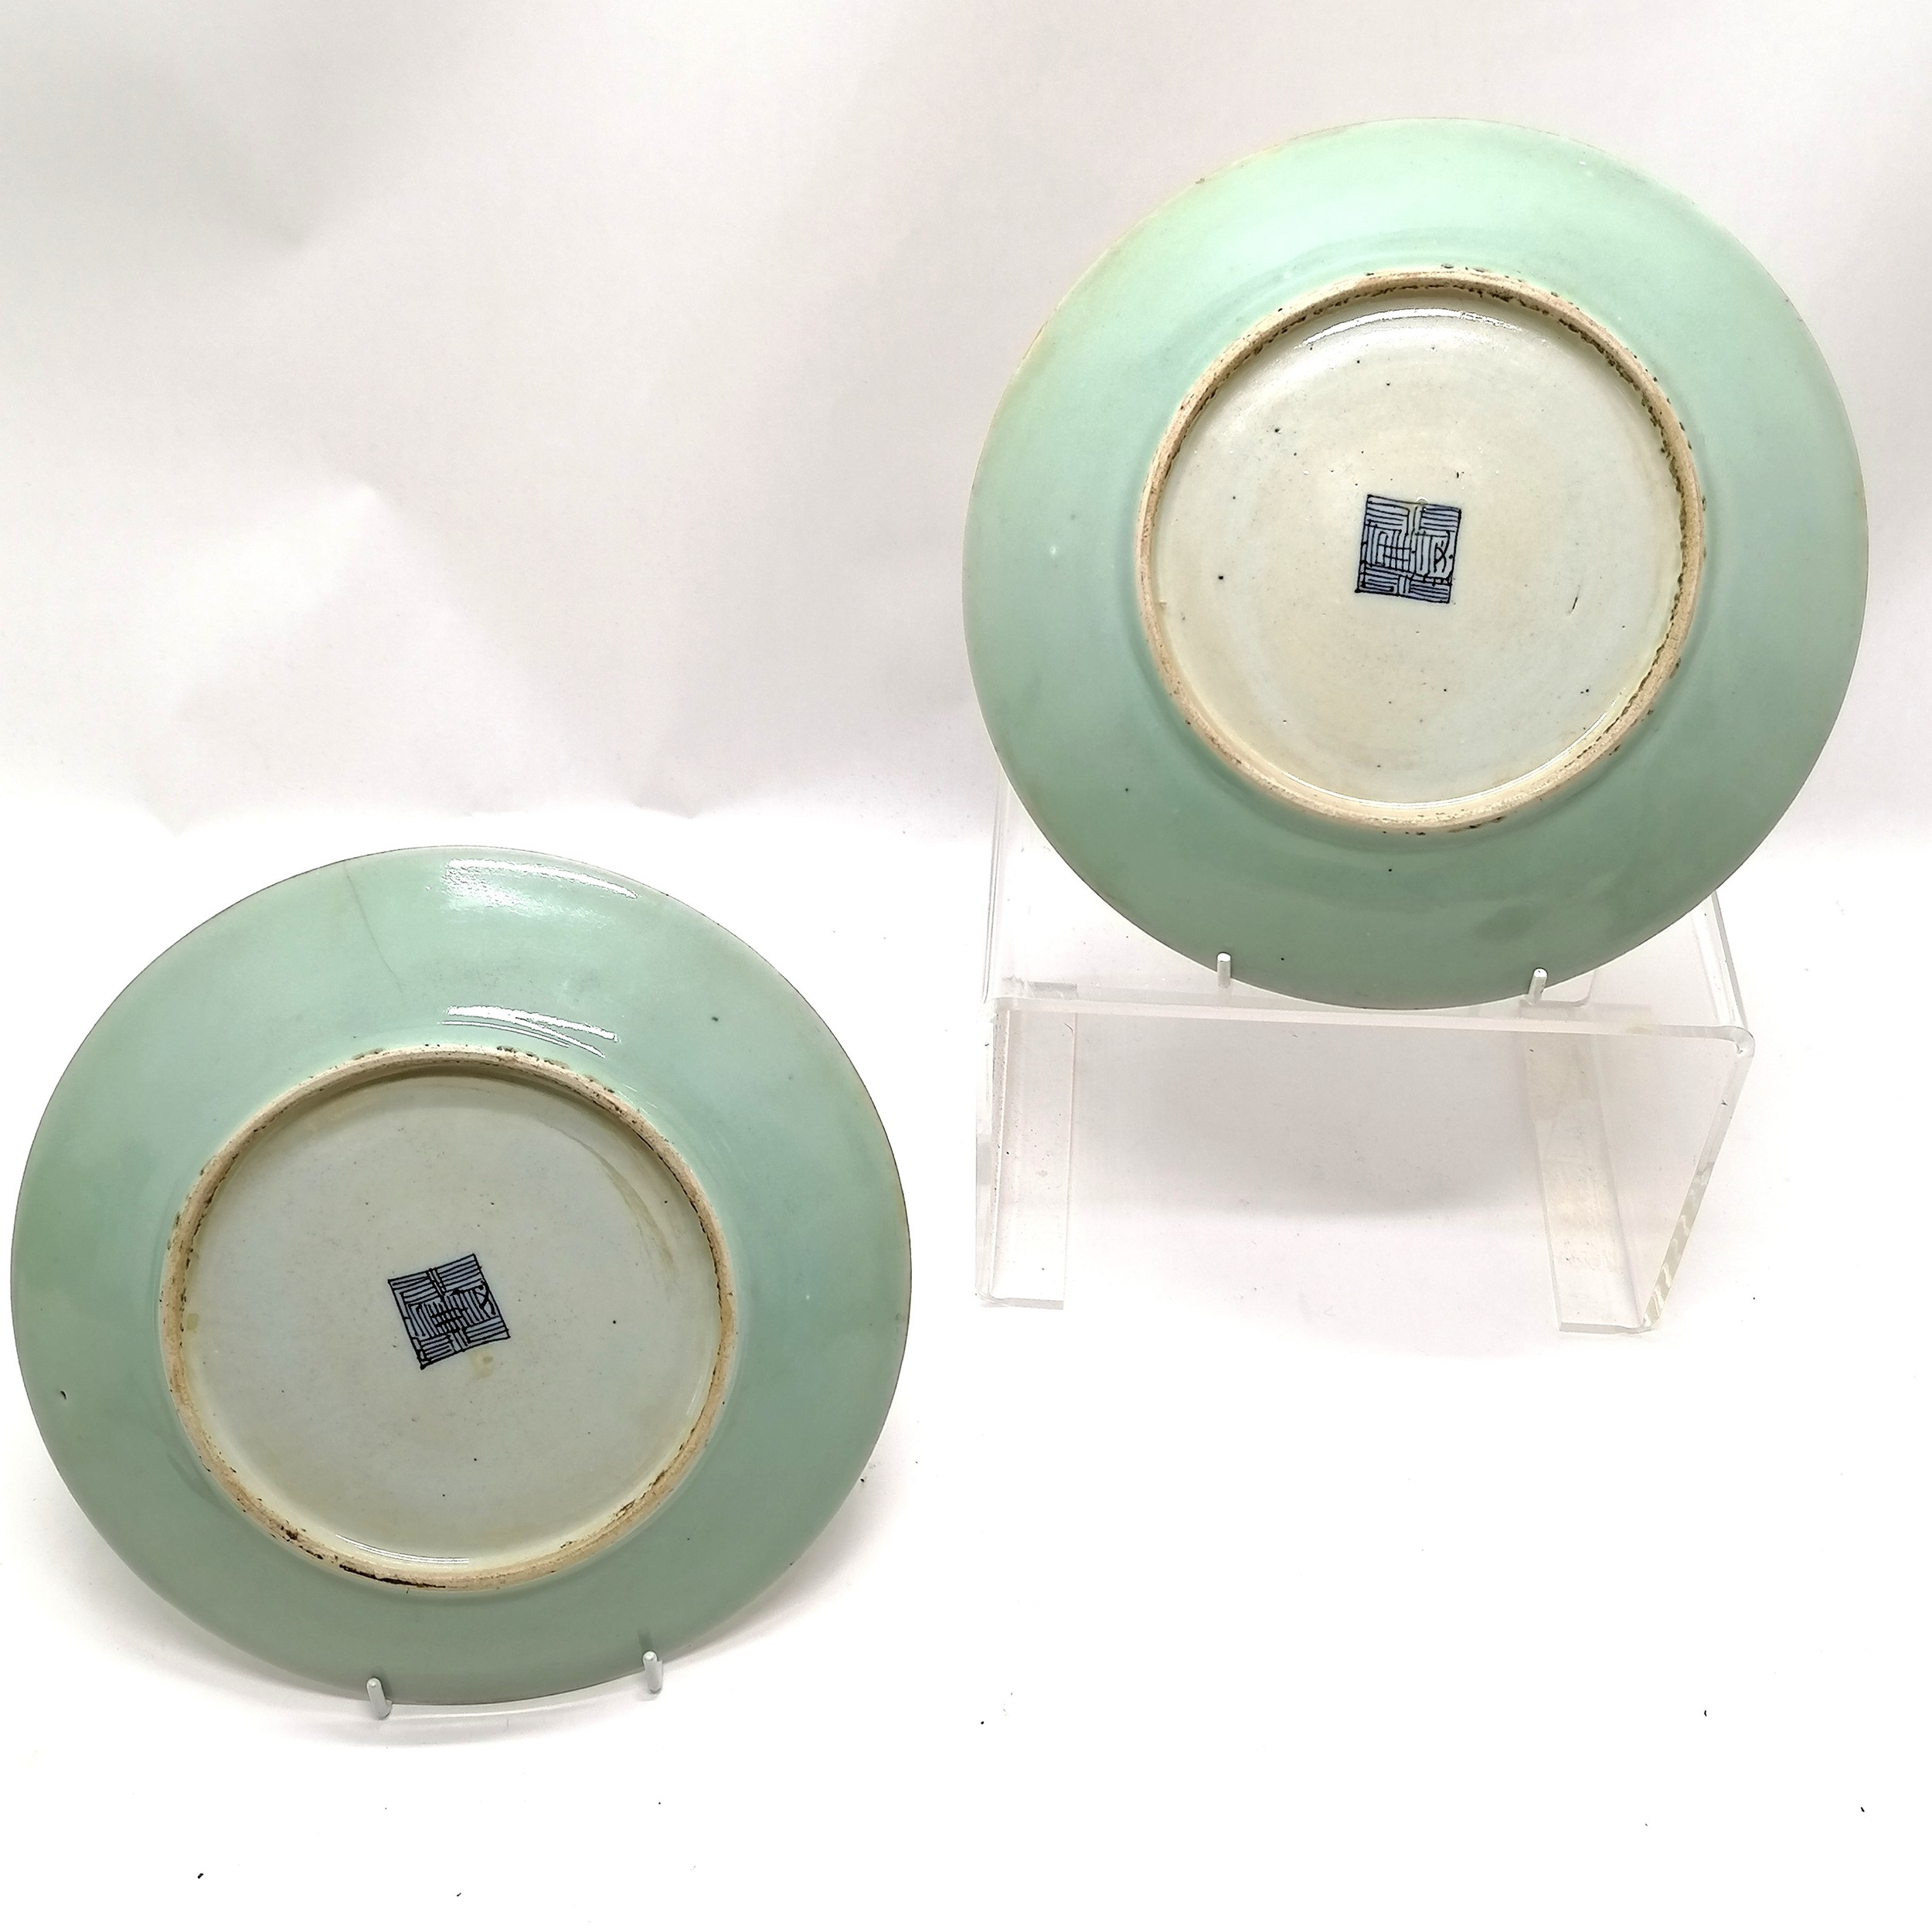 Pair of antique Chinese Cantonese plates with profuse bird & flower decoration - 25.5cm diameter & - Image 7 of 7